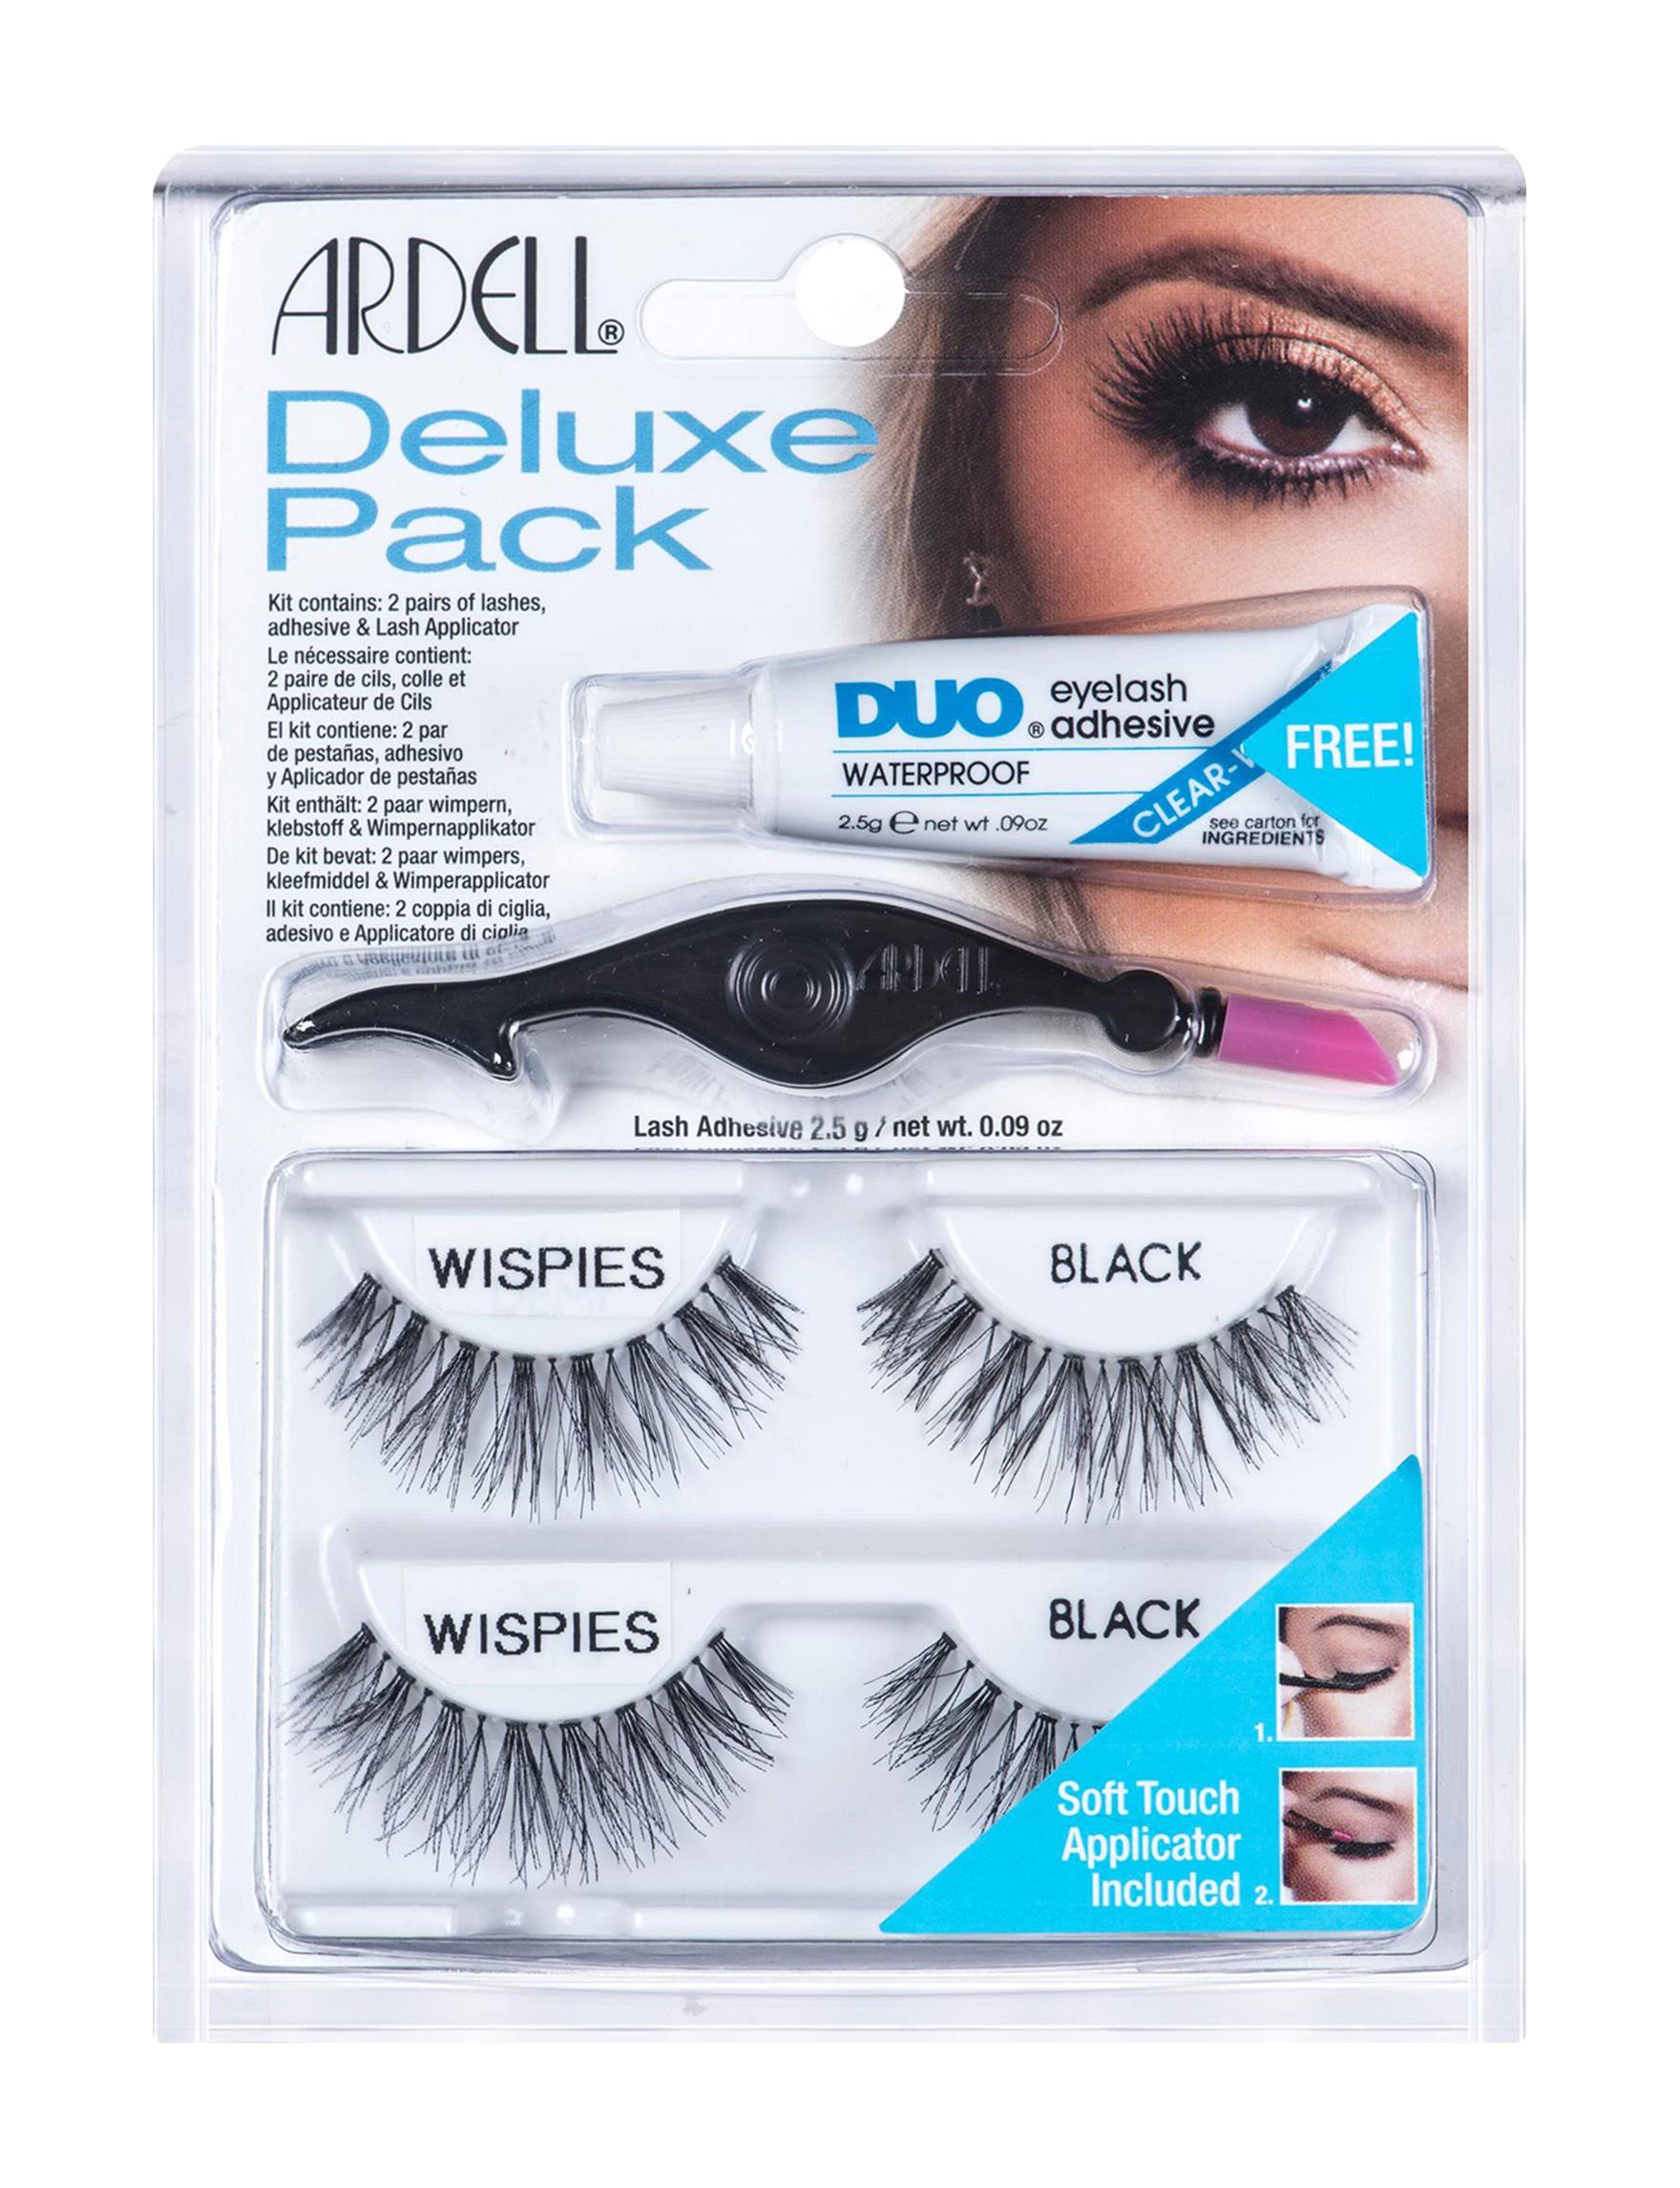 Ardell Deluxe Pack Wispies Black Lashes - Glue and Applicator